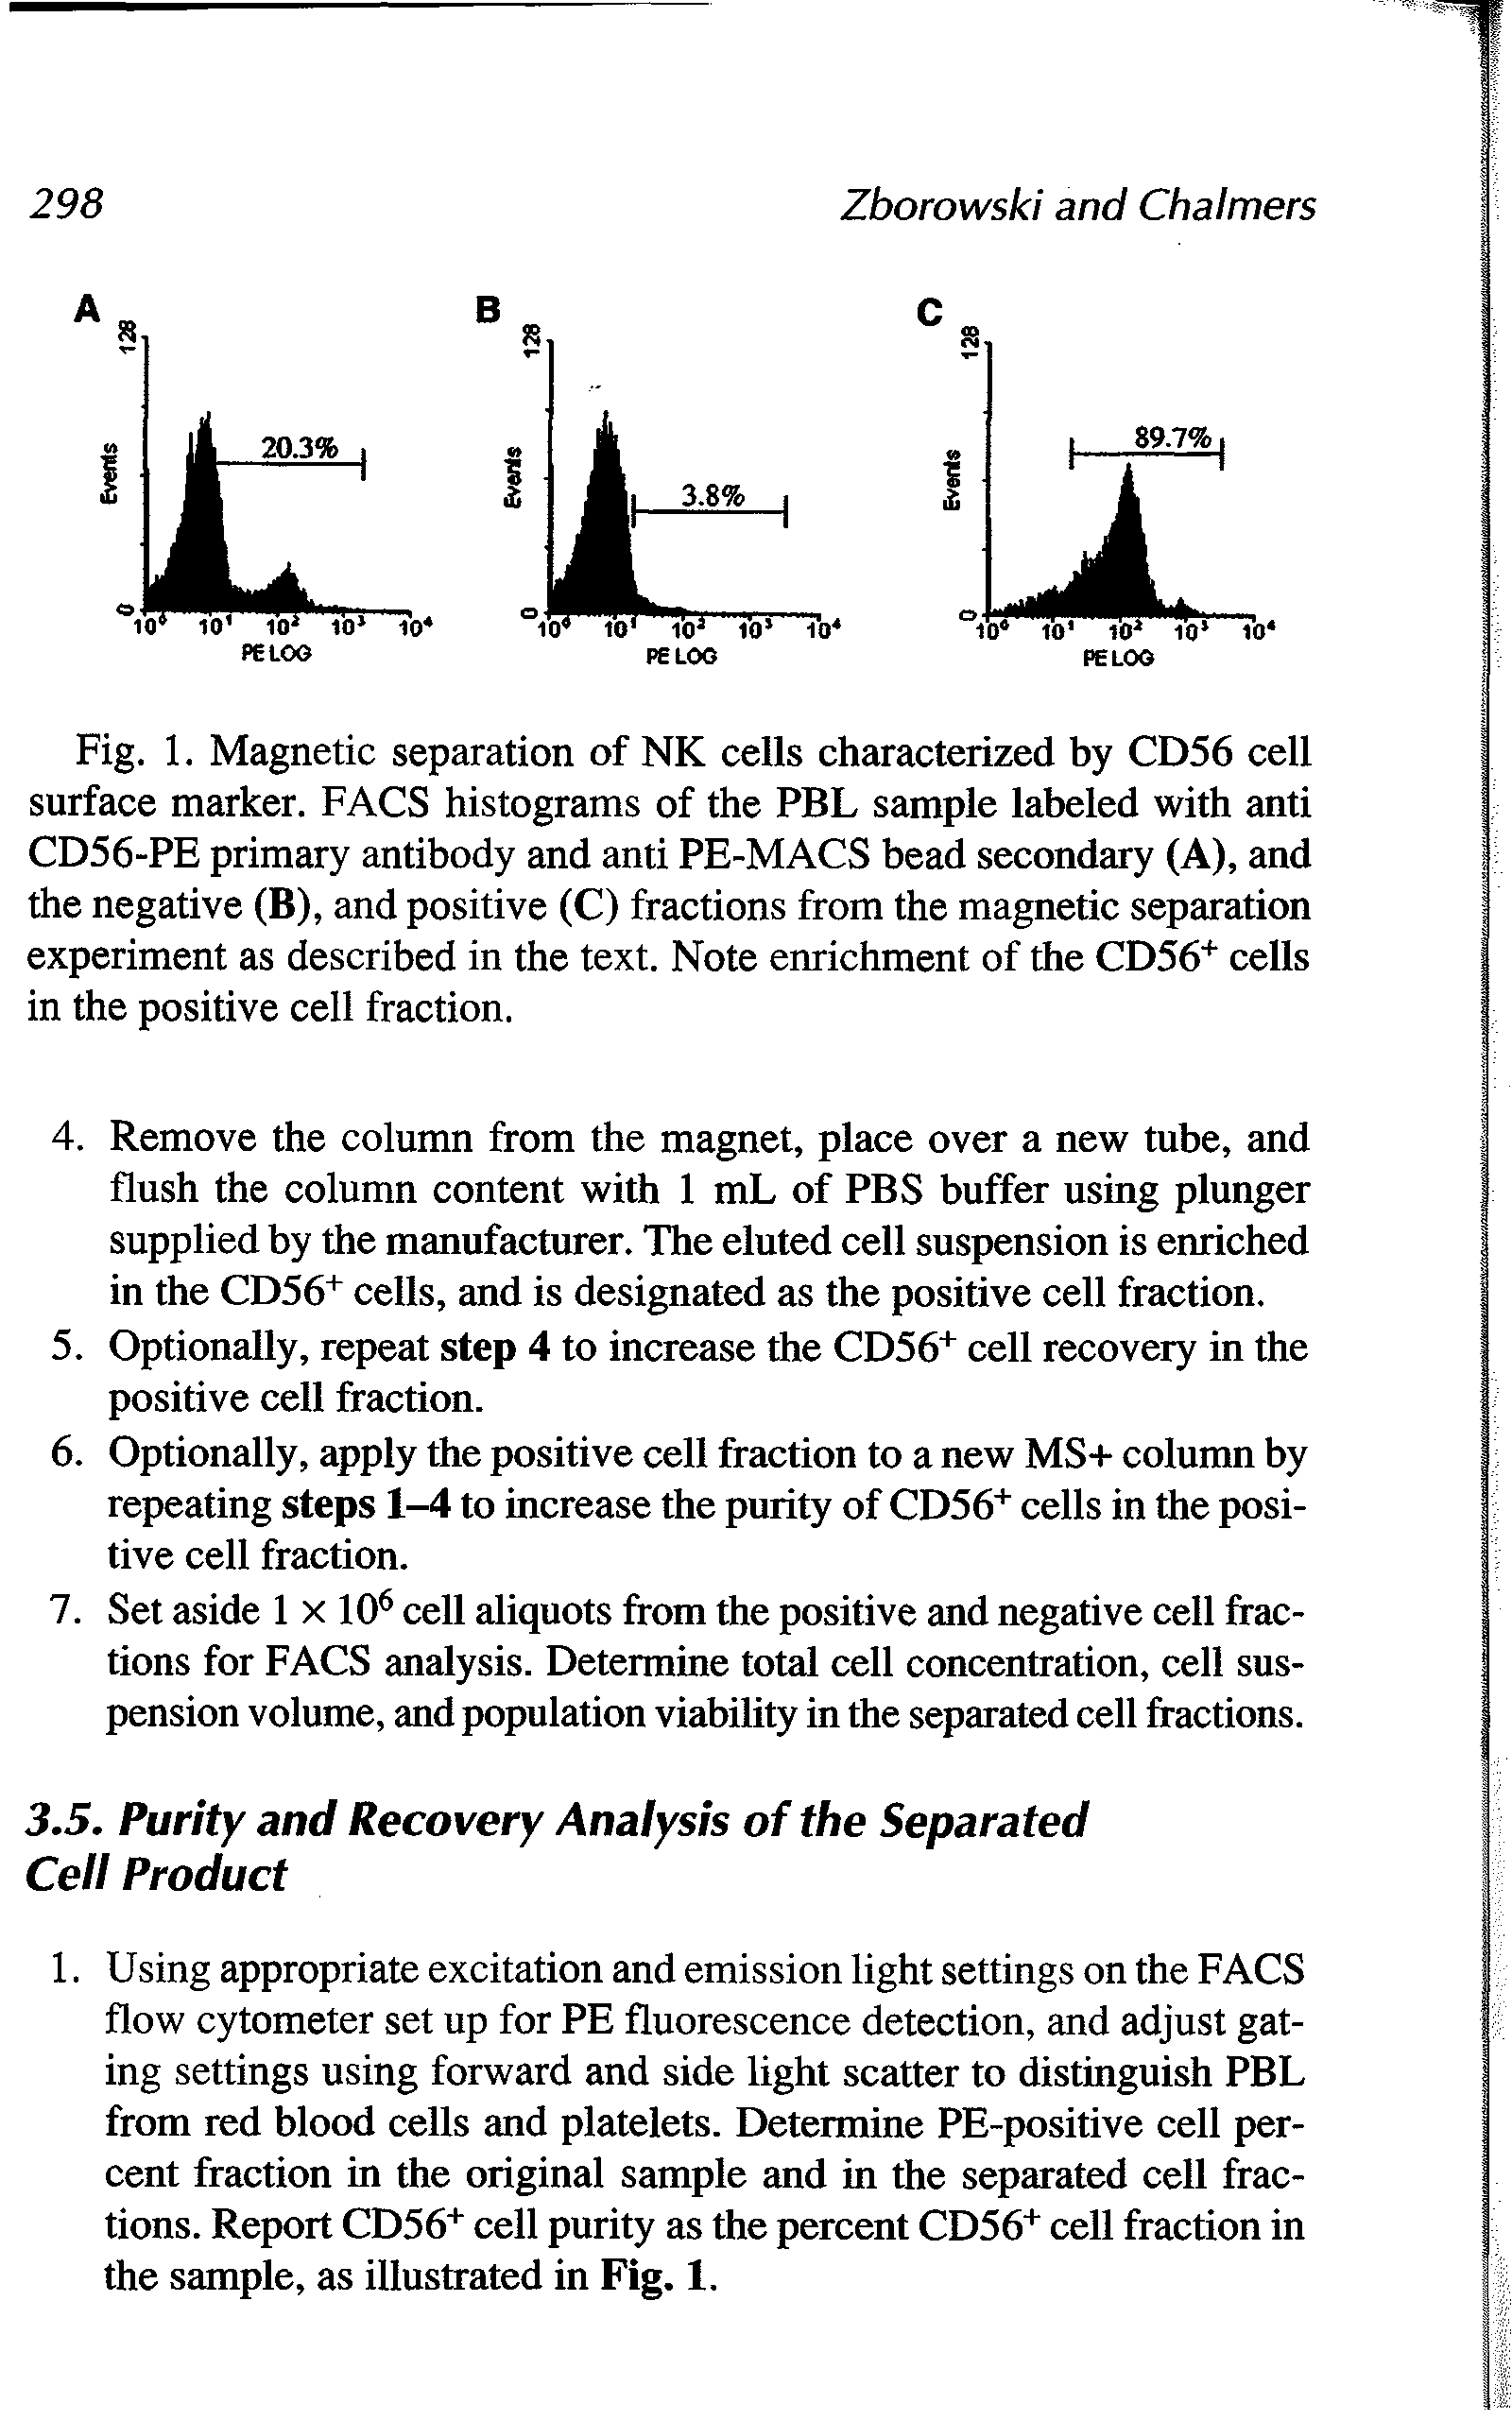 Fig. 1. Magnetic separation of NK cells characterized by CD56 cell surface marker. FACS histograms of the PBL sample labeled with anti CD56-PE primary antibody and anti PE-MACS bead secondary (A), and the negative (B), and positive (C) fractions from the magnetic separation experiment as described in the text. Note enrichment of the CD56+ cells in the positive cell fraction.